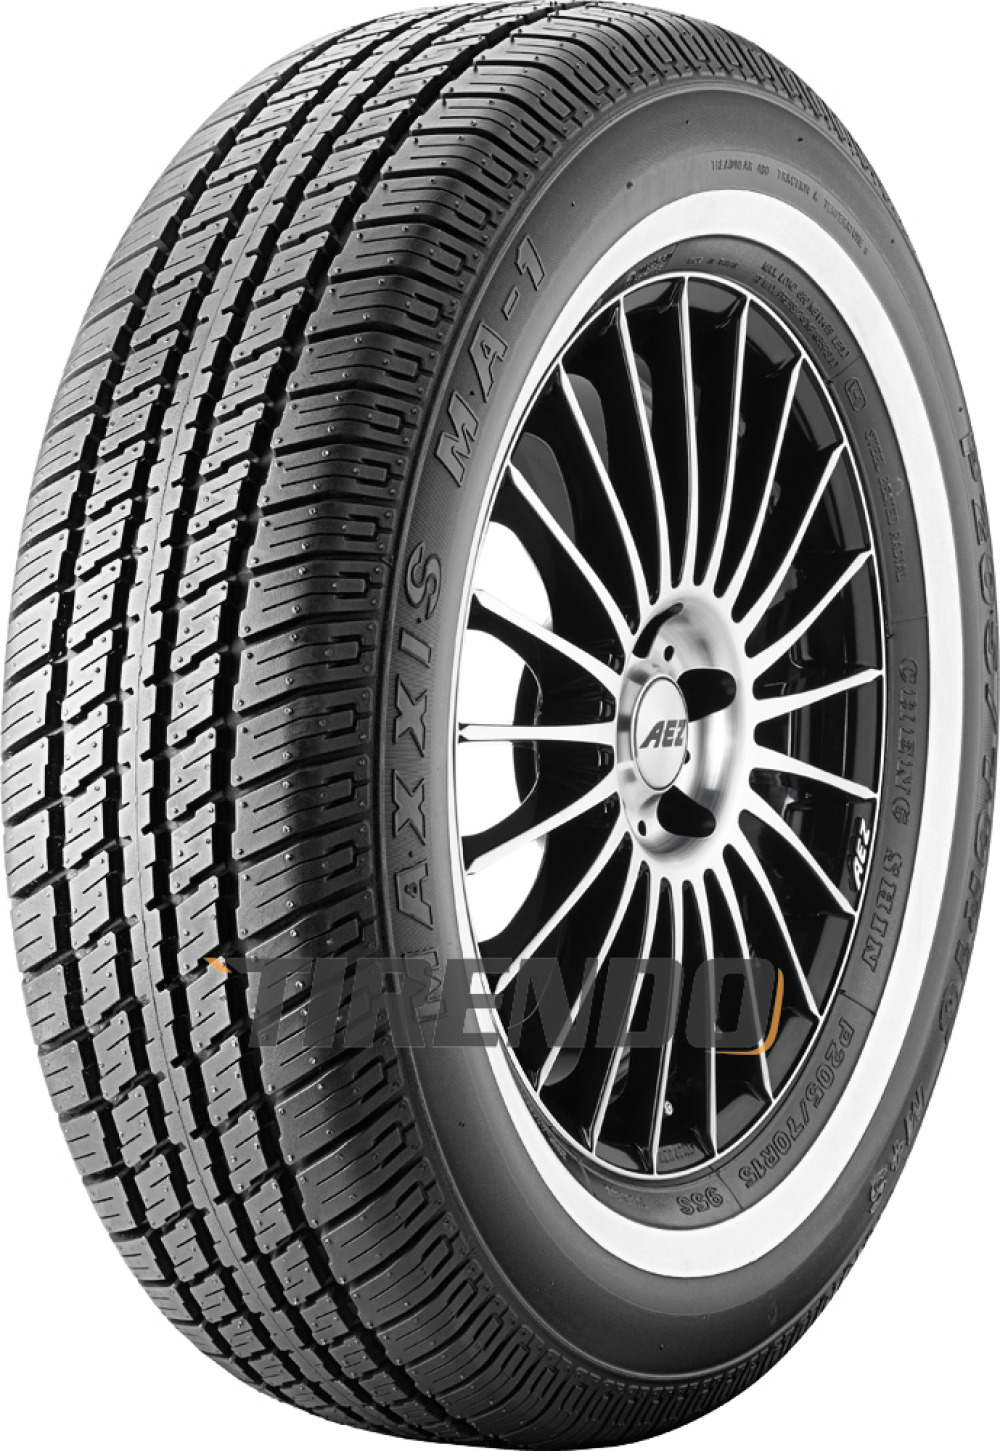 Maxxis MA 1 ( 185/75 R14 89S WSW 20mm ) von Maxxis